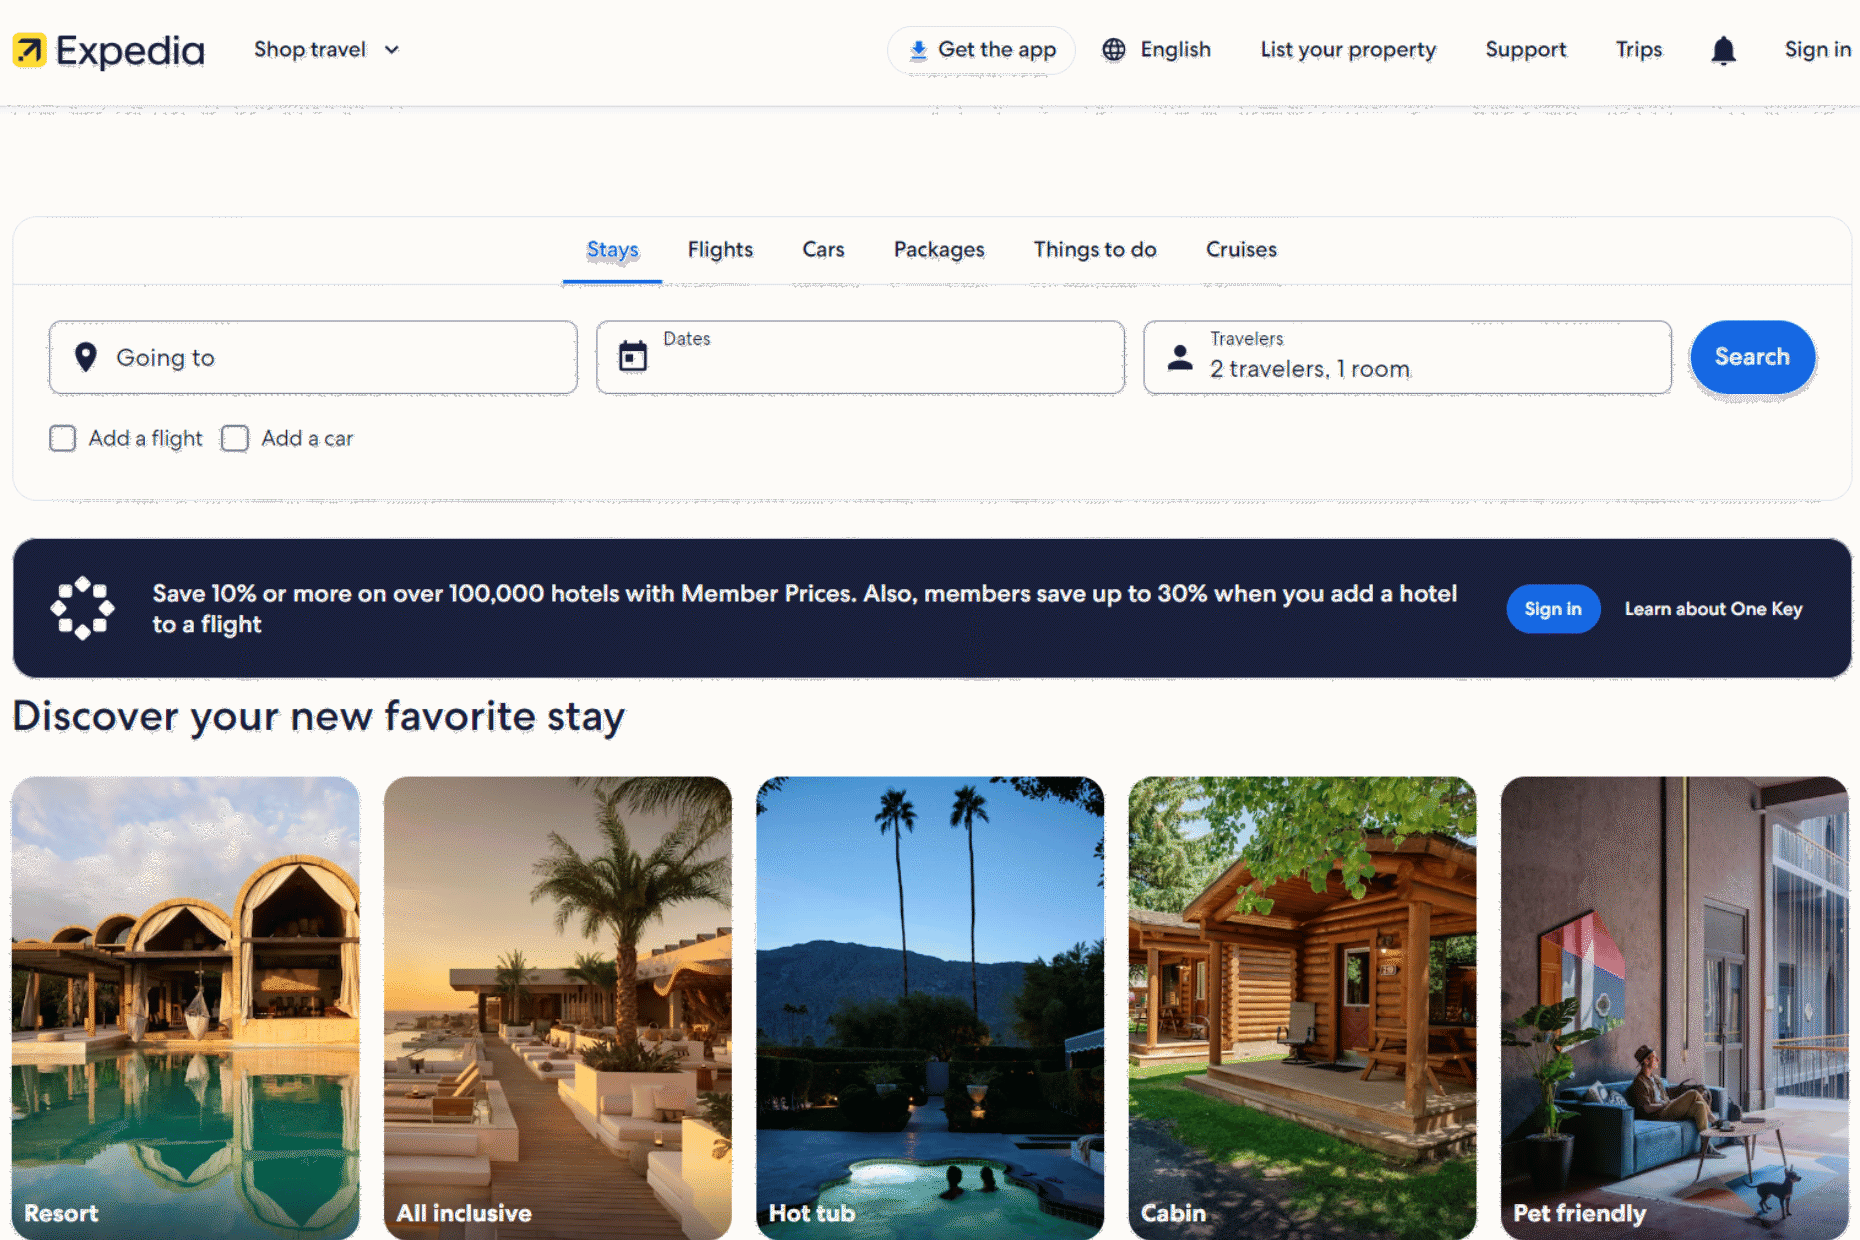 <p>Expedia, which <a href="https://www.expediagroup.com/who-we-are/our-story/default.aspx#module-tabs_item--1">first went live in 1996</a> as a division of Microsoft, is one of the oldest and most established travel sites on the web. It offers unique bundled package deals, including travel insurance and hotel and car rental options, as well as handy search filters to help you plan your ideal vacation, whether you’re heading to a popular destination or somewhere off the beaten track. Personal finance website NerdWallet reported finding savings of <a href="https://www.nerdwallet.com/article/travel/pros-and-cons-of-expedia?ajs_uid=6fc244bc63121e8c96ca5f5616266be6e86905cf1d7336abc1de656fbc3c69fd&ajs_uid=6fc244bc63121e8c96ca5f5616266be6e86905cf1d7336abc1de656fbc3c69fd">as much as 70 per cent</a>. There’s also a free cancellation option within 24 hours of booking. </p>